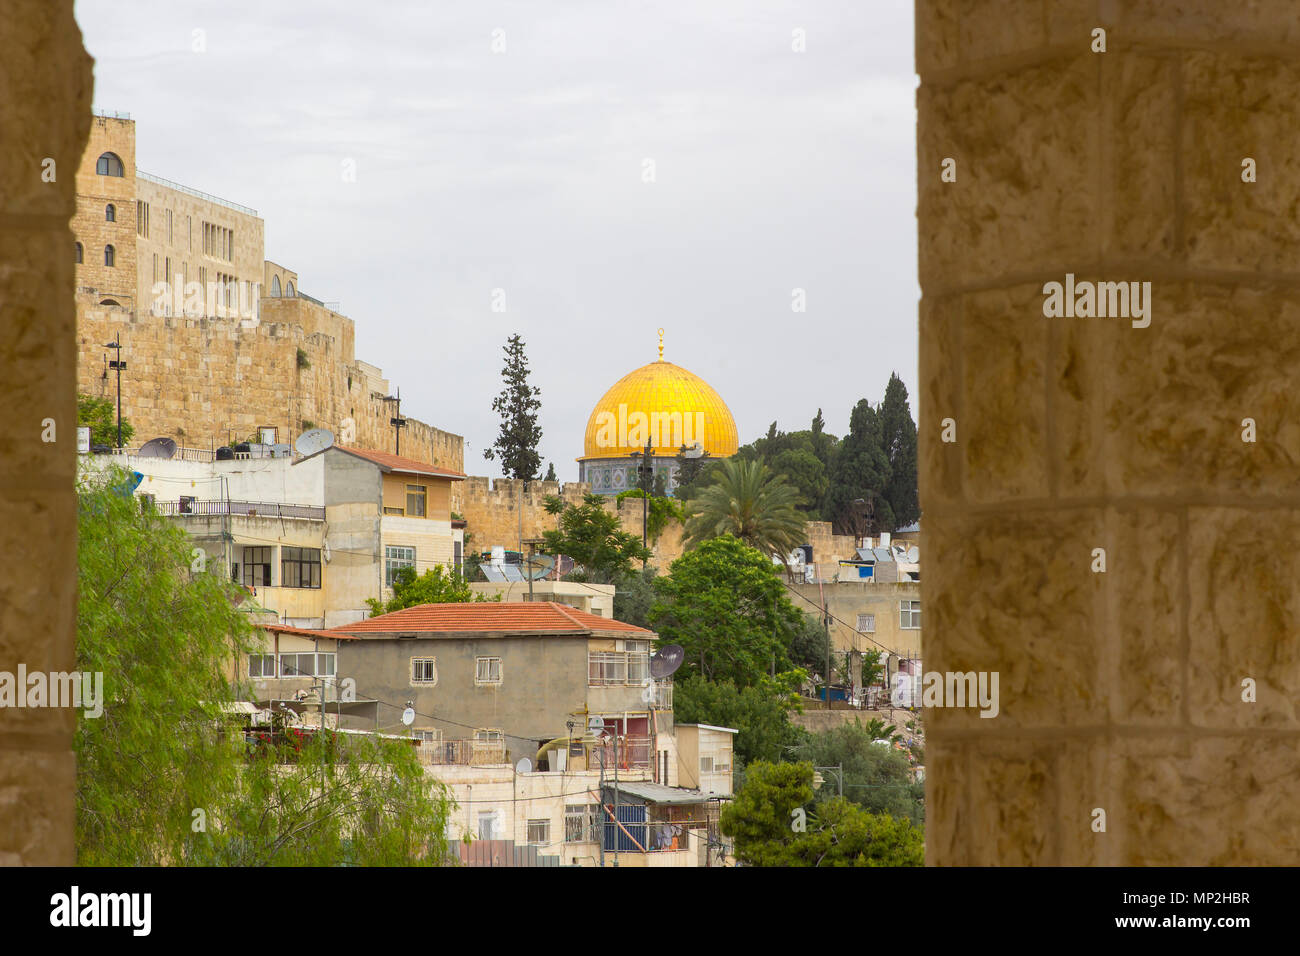 A view of the Dome of the Rock on the Temple Mount in Jerusalem across the city from the rooftop of the ancient Caiaphas's Palace Stock Photo